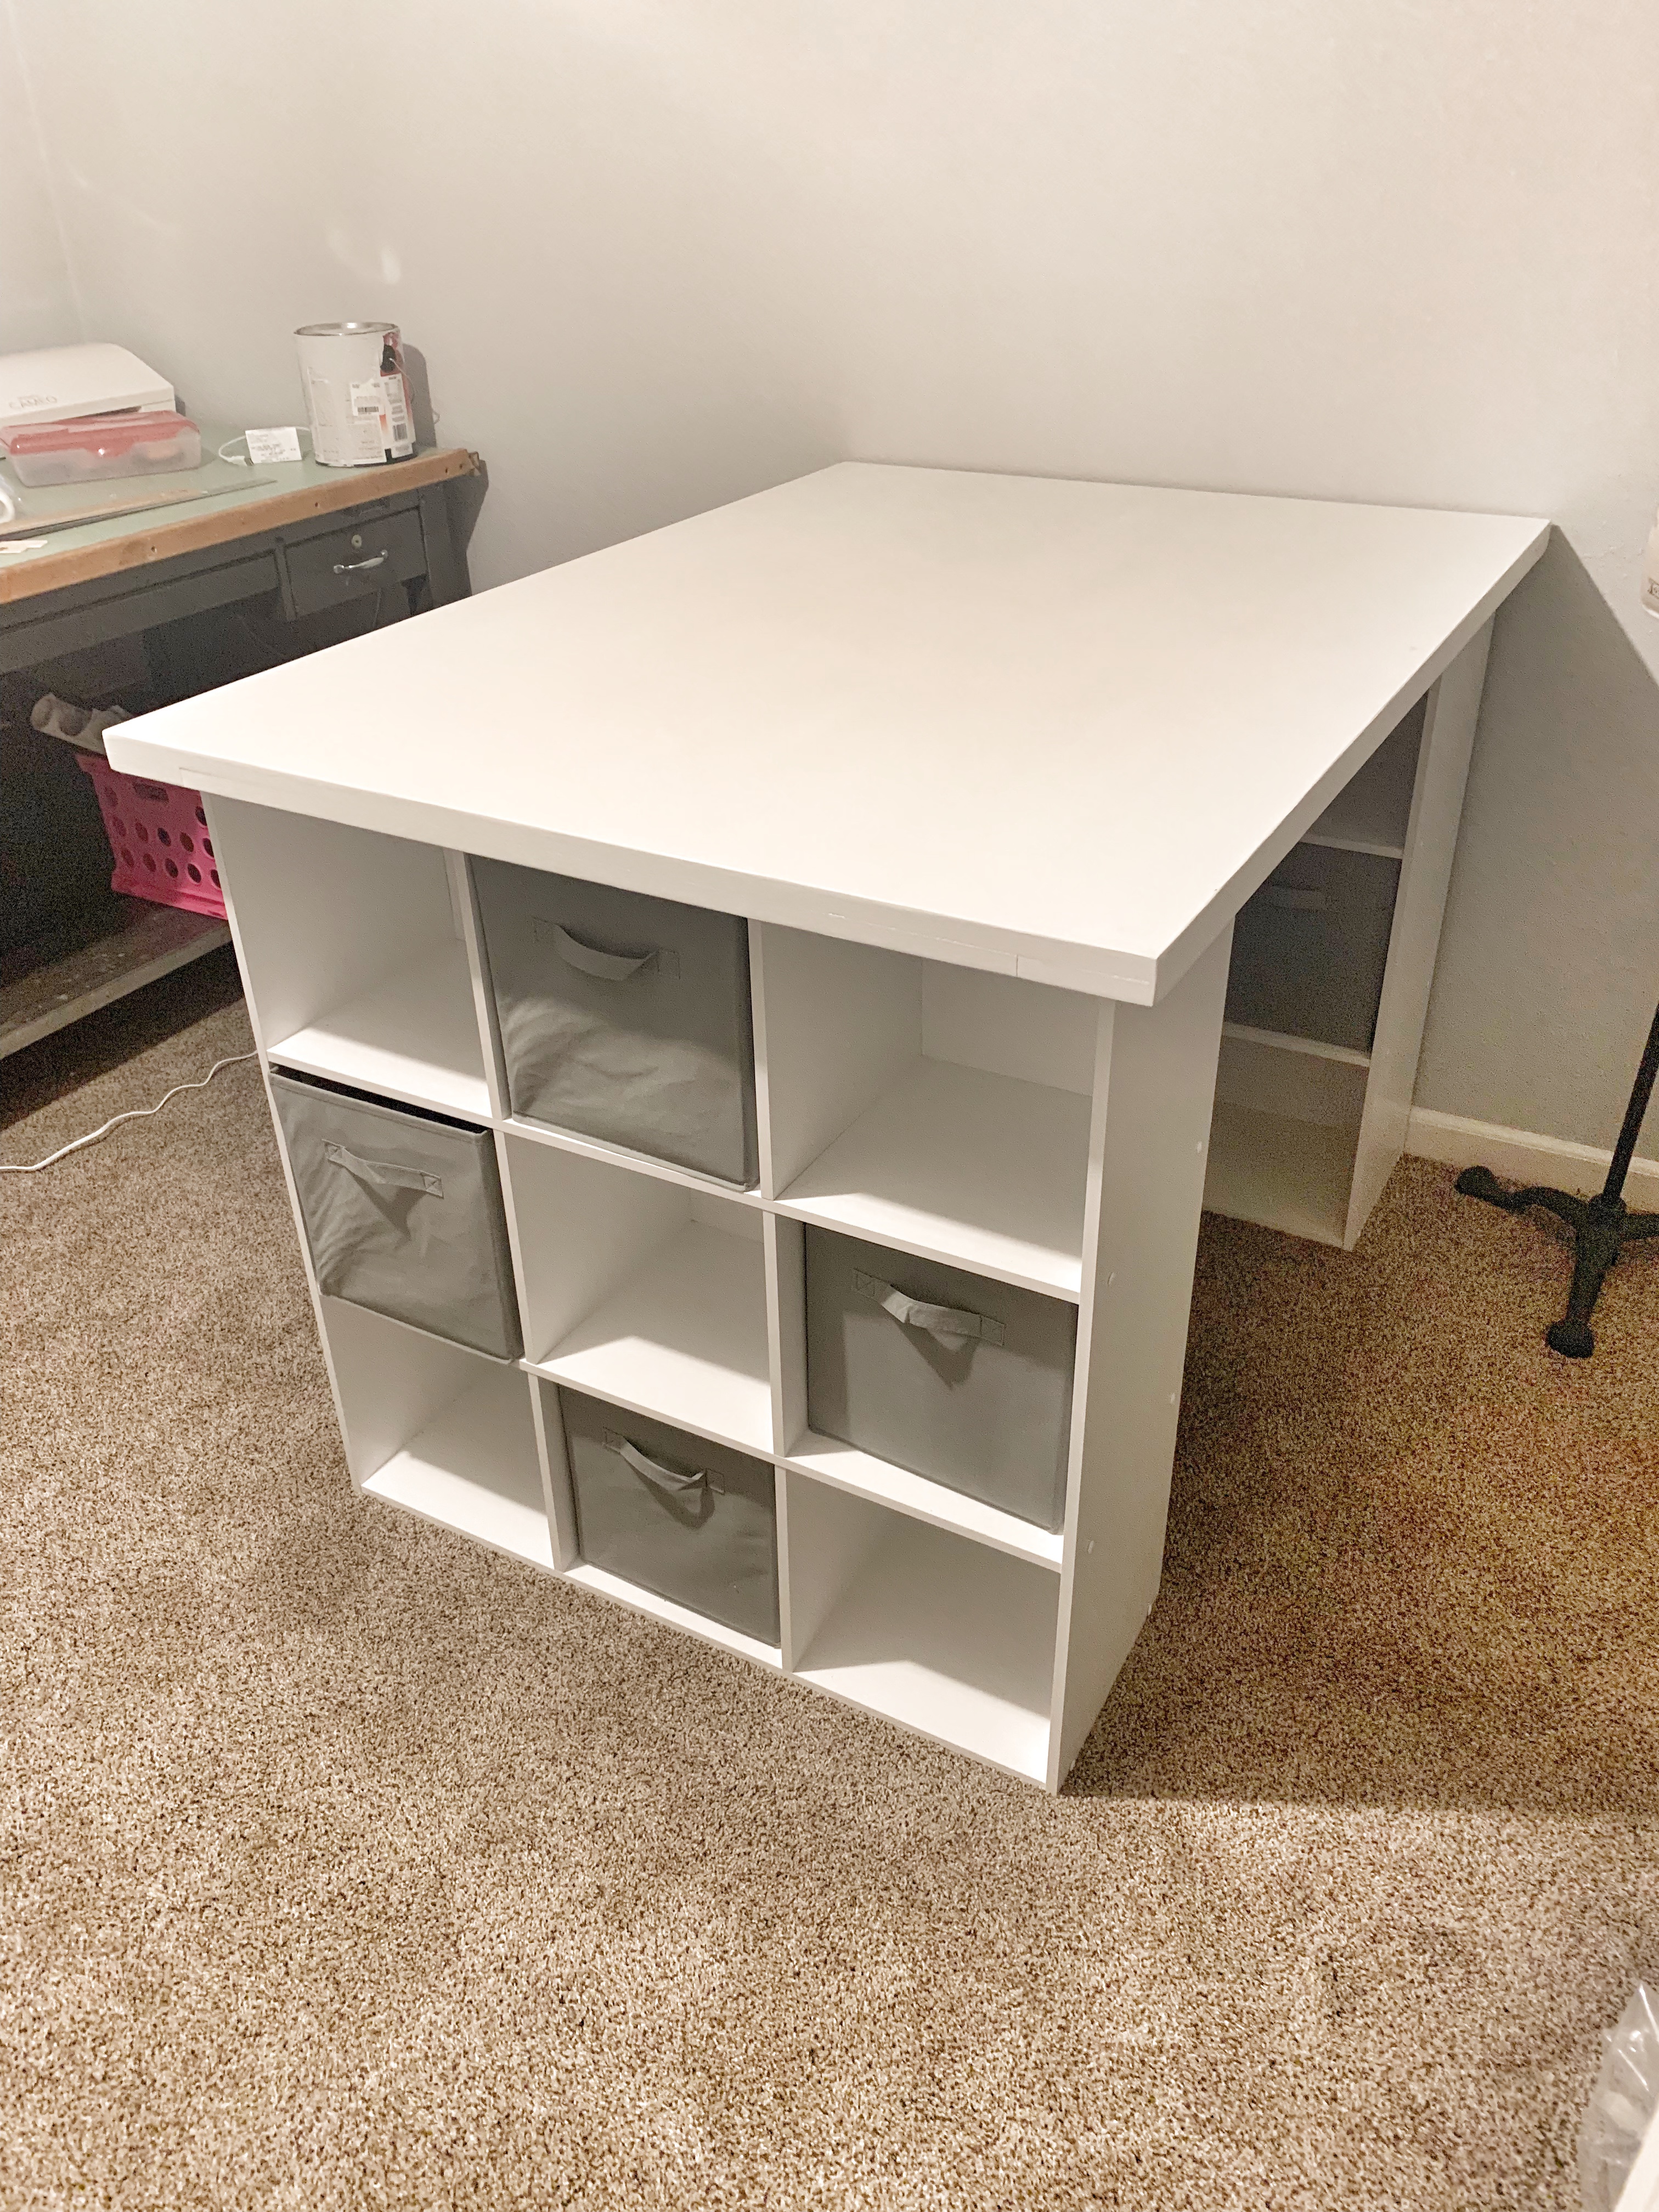 DIY CRAFT TABLE WITH CREATE ROOM CUBBY